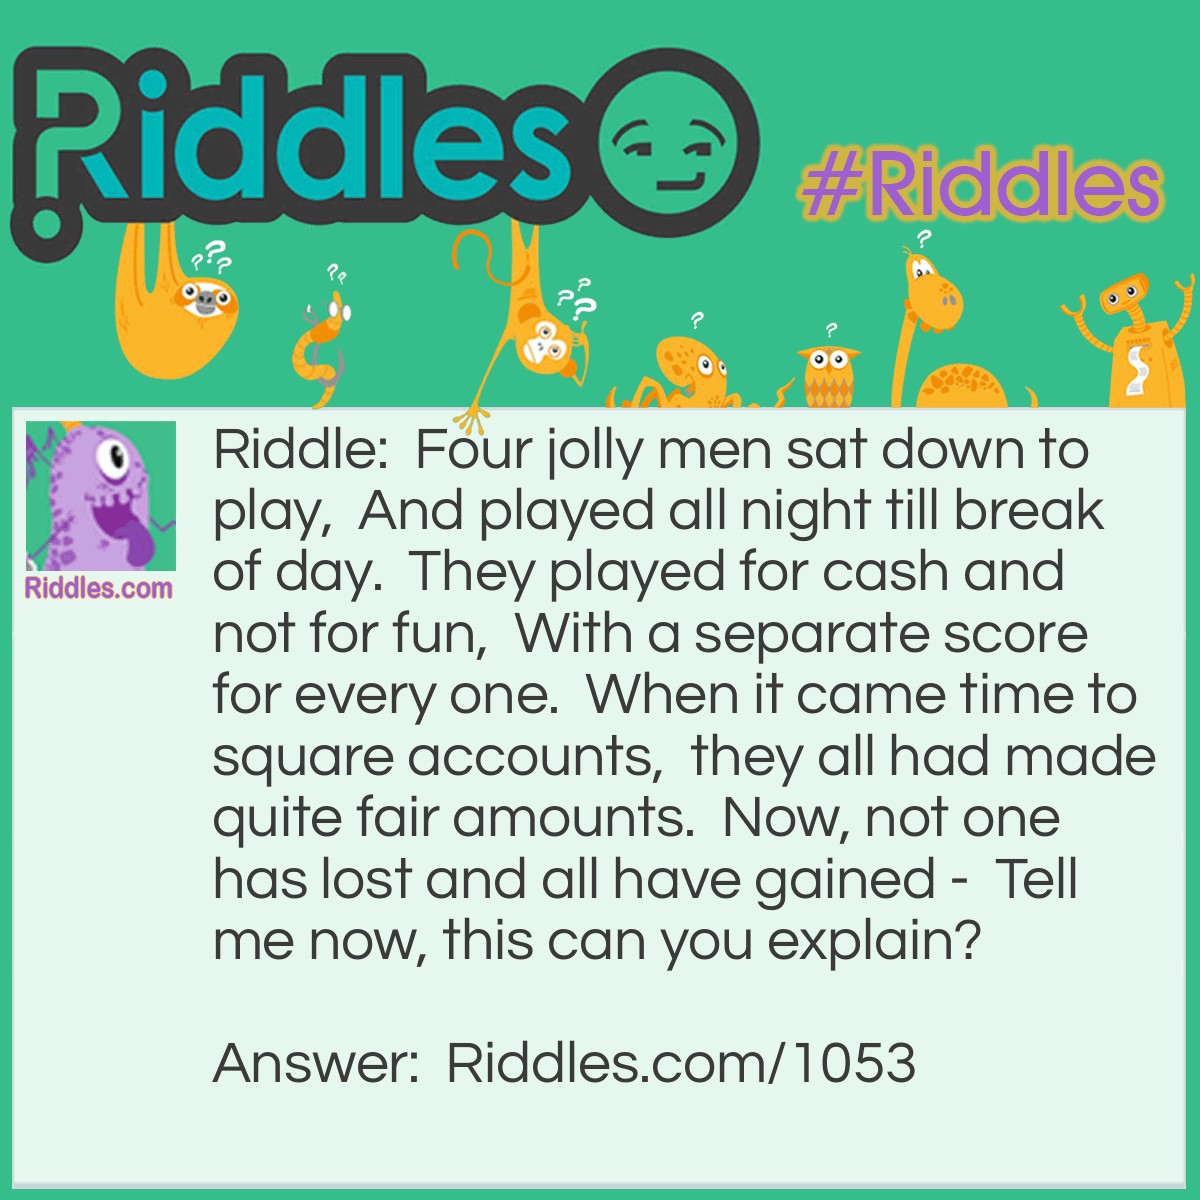 Riddle: Four jolly men sat down to play,  And played all night till break of day.  They played for cash and not for fun,  With a separate score for every one.  When it came time to square accounts,  they all had made quite fair amounts.  Now, not one has lost and all have gained -  Tell me now, this can you explain? Answer: The four jolly men are members of an orchestra hired to play at a dance.